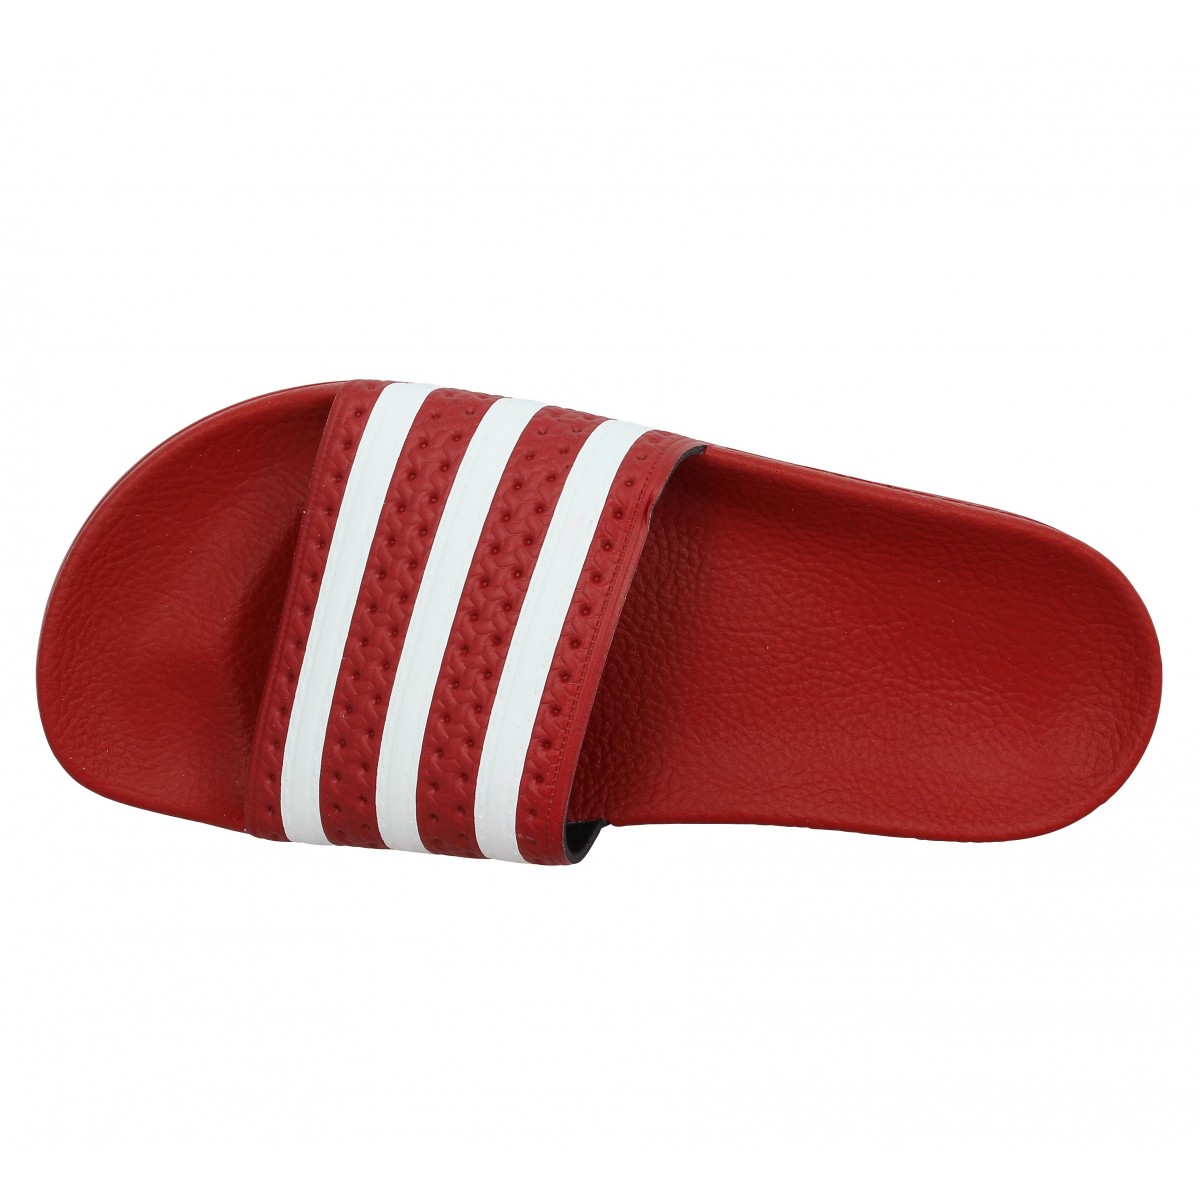 Adidas adilette rouge homme | chaussures